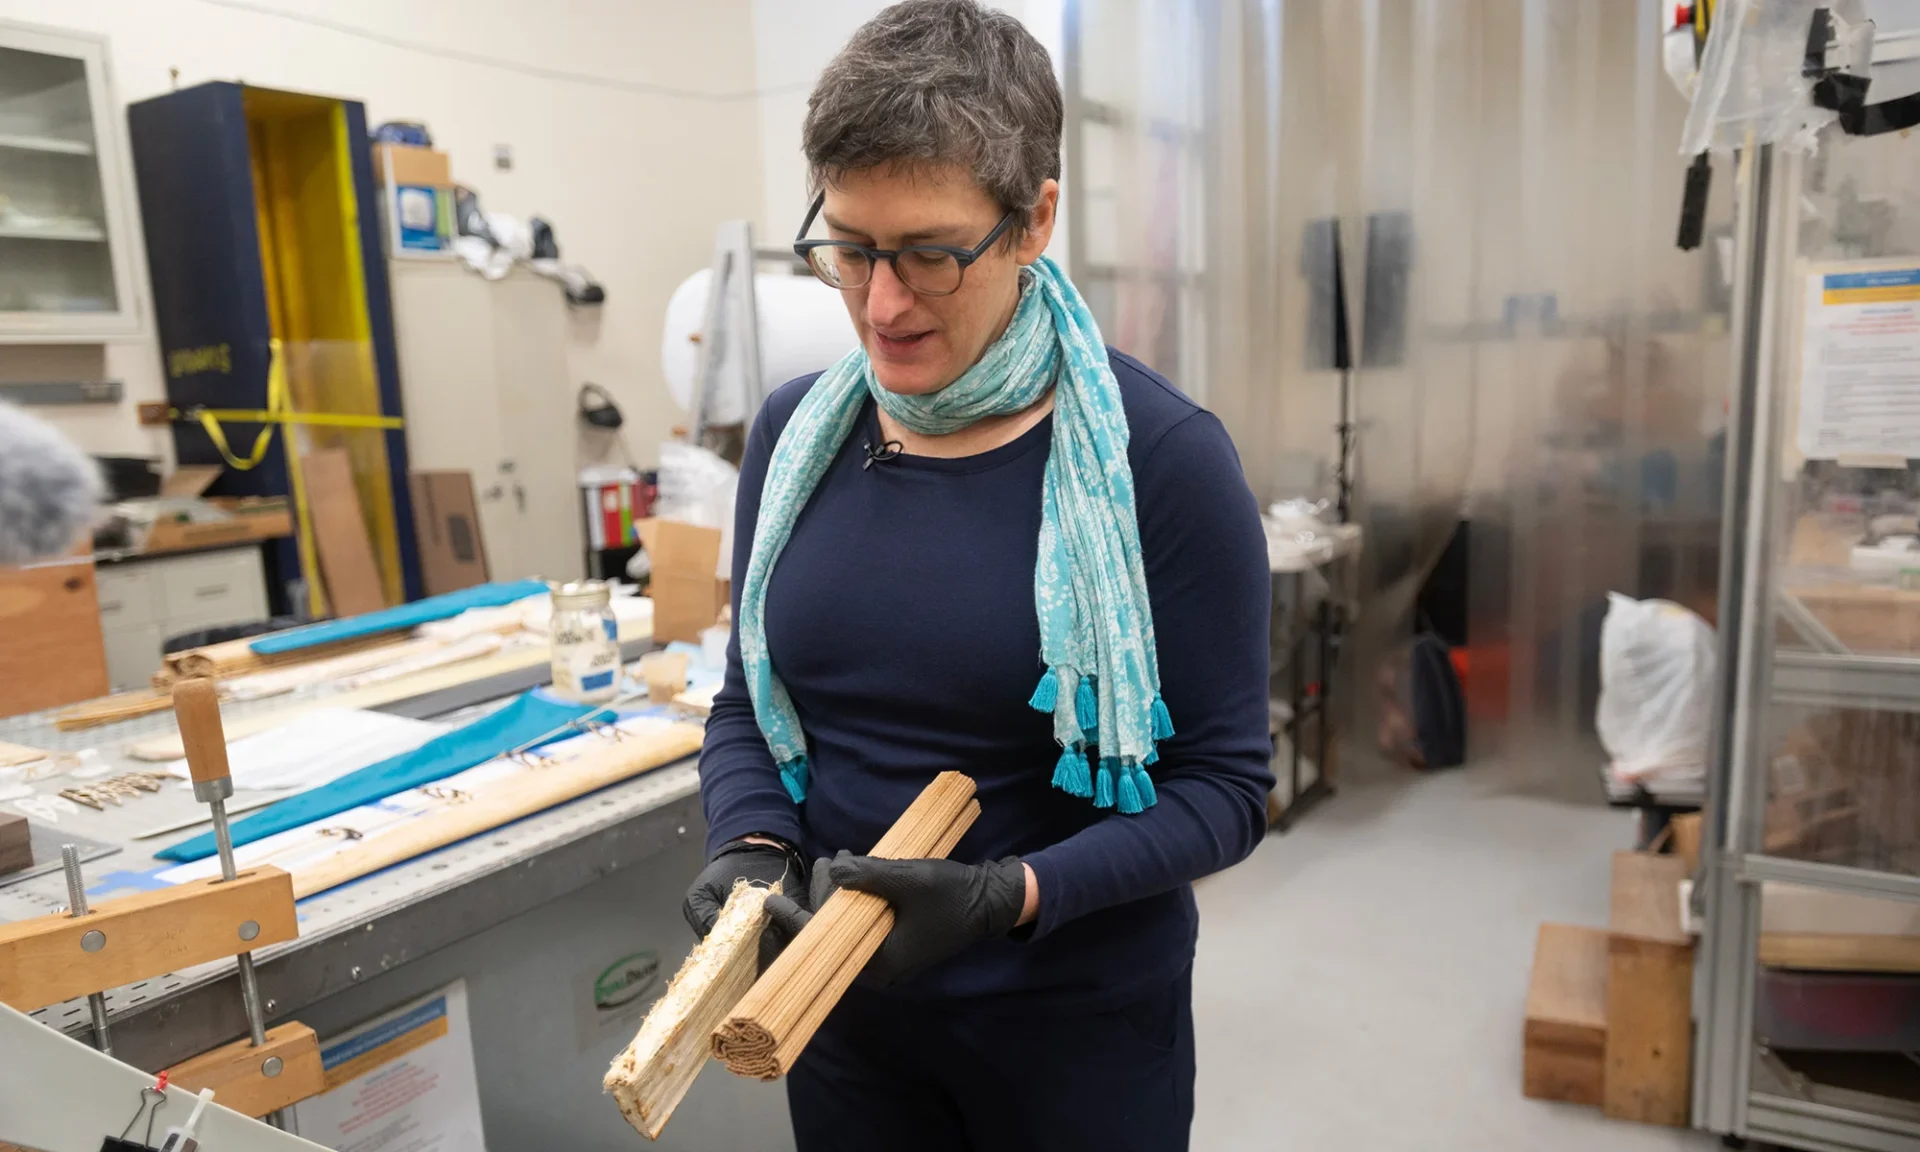 Valeria La Saponara, a professor in the Department of Mechanical and Aerospace Engineering, has a vision to develop compostable, ecologically sound wind turbine blades from bamboo and mycelium. (Gregory Urquiaga/UC Davis)